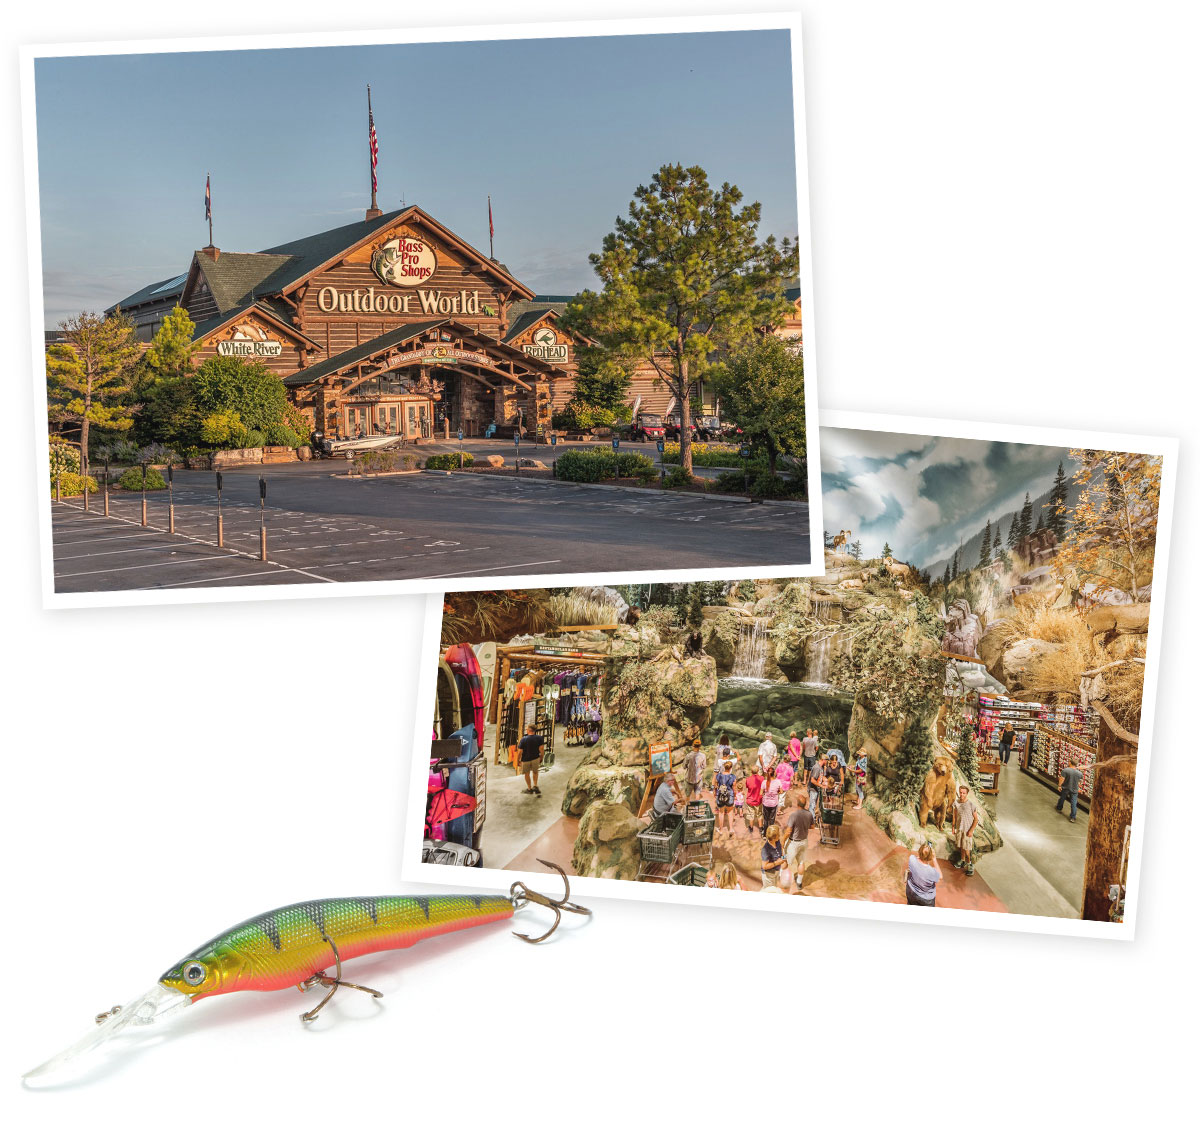 Photos showing the exterior and interior of a Bass Pro Shops location